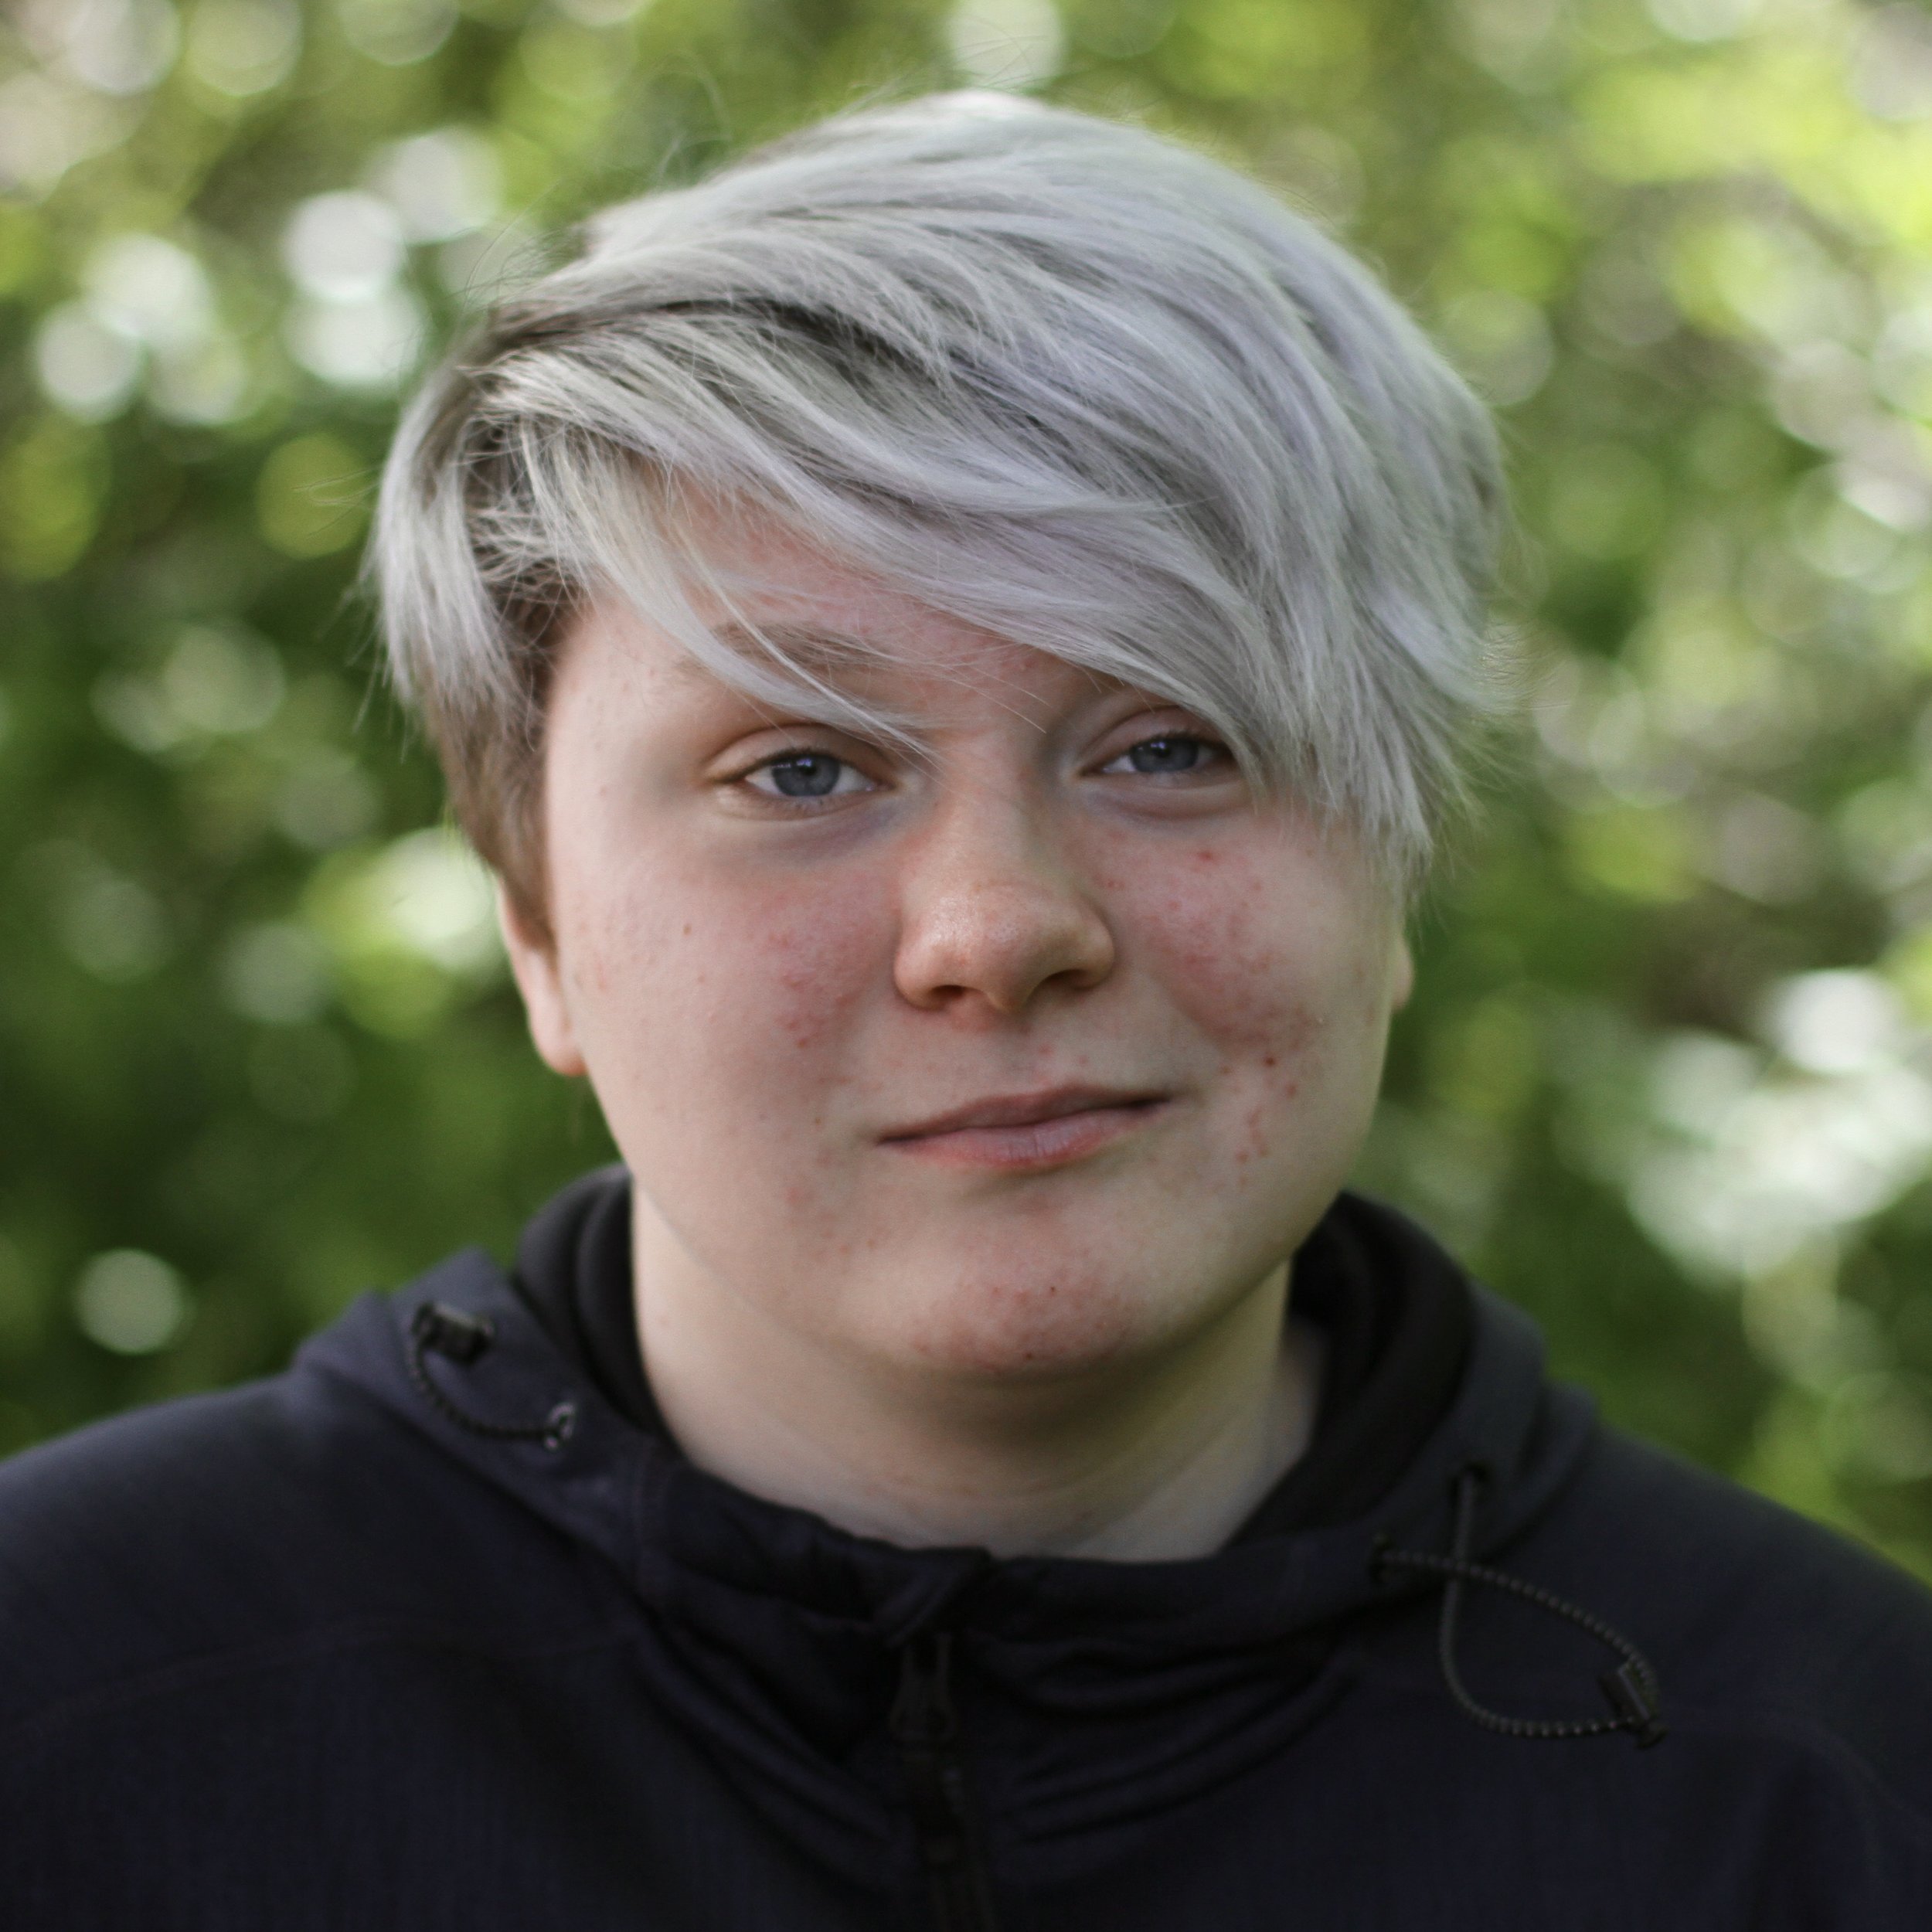 Teenage student with short white hair